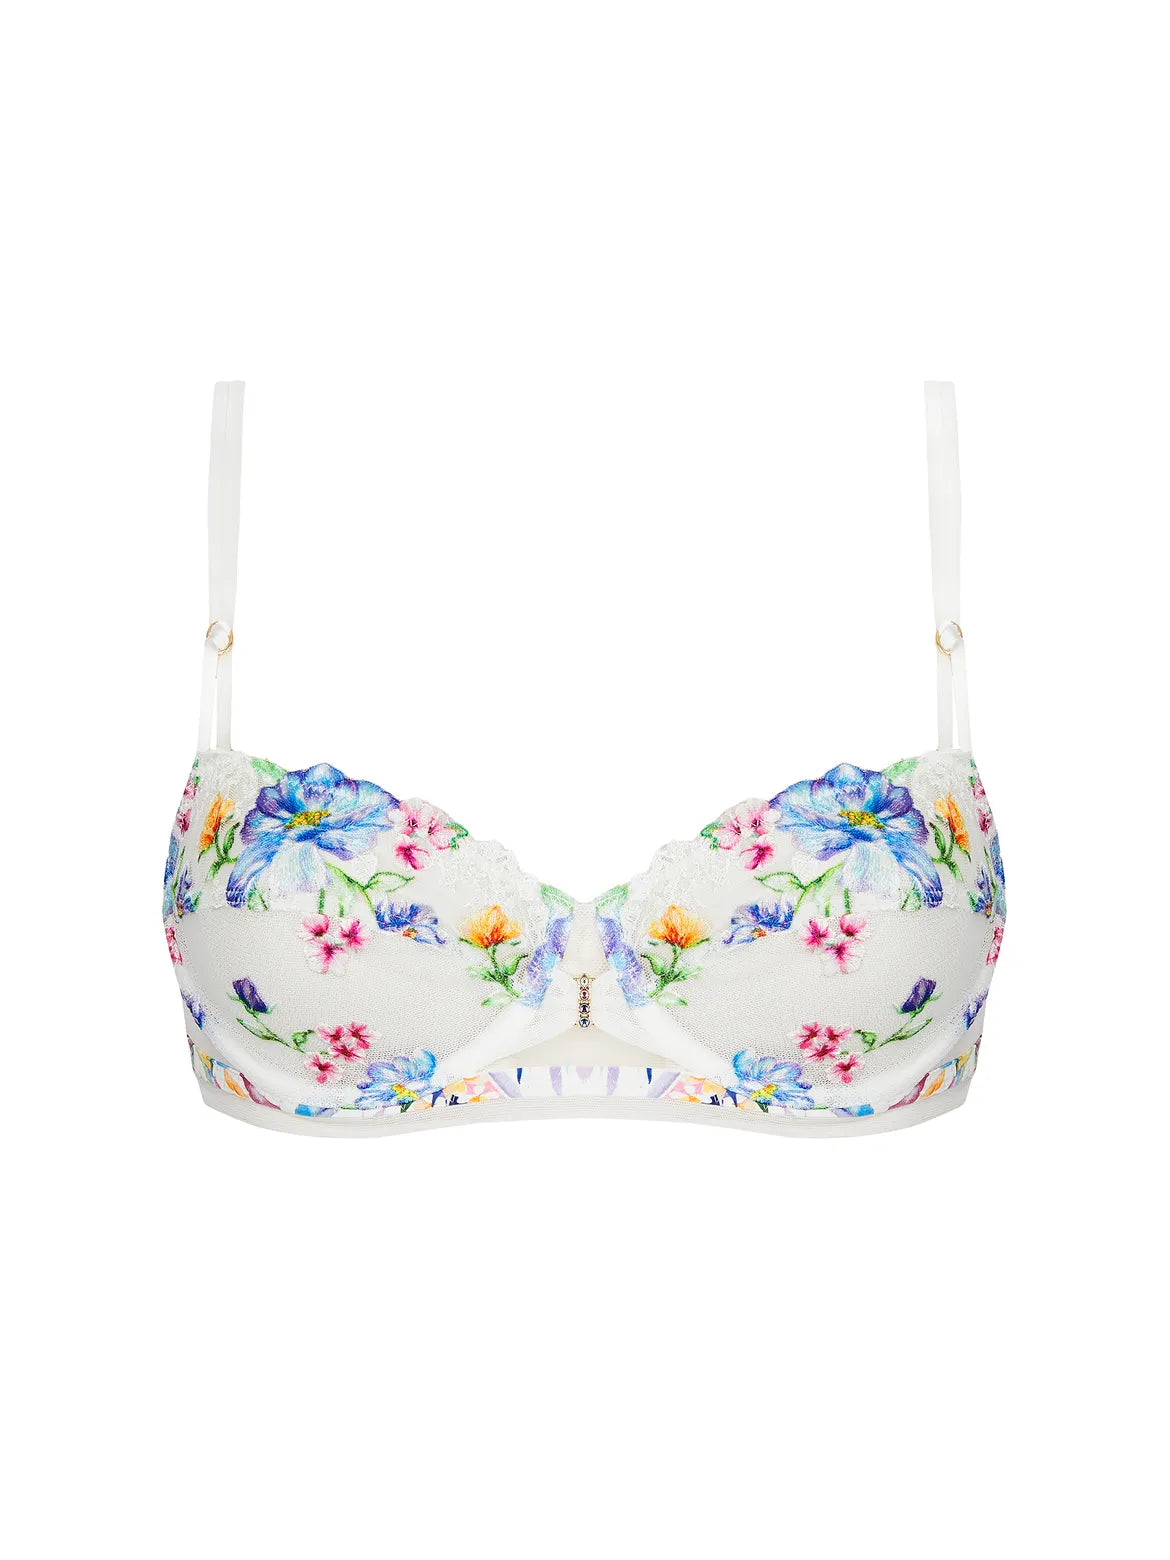 Lise Charmel - Baisers Legers Demi Cup Bra in multi floral, available at LaSource in Darien